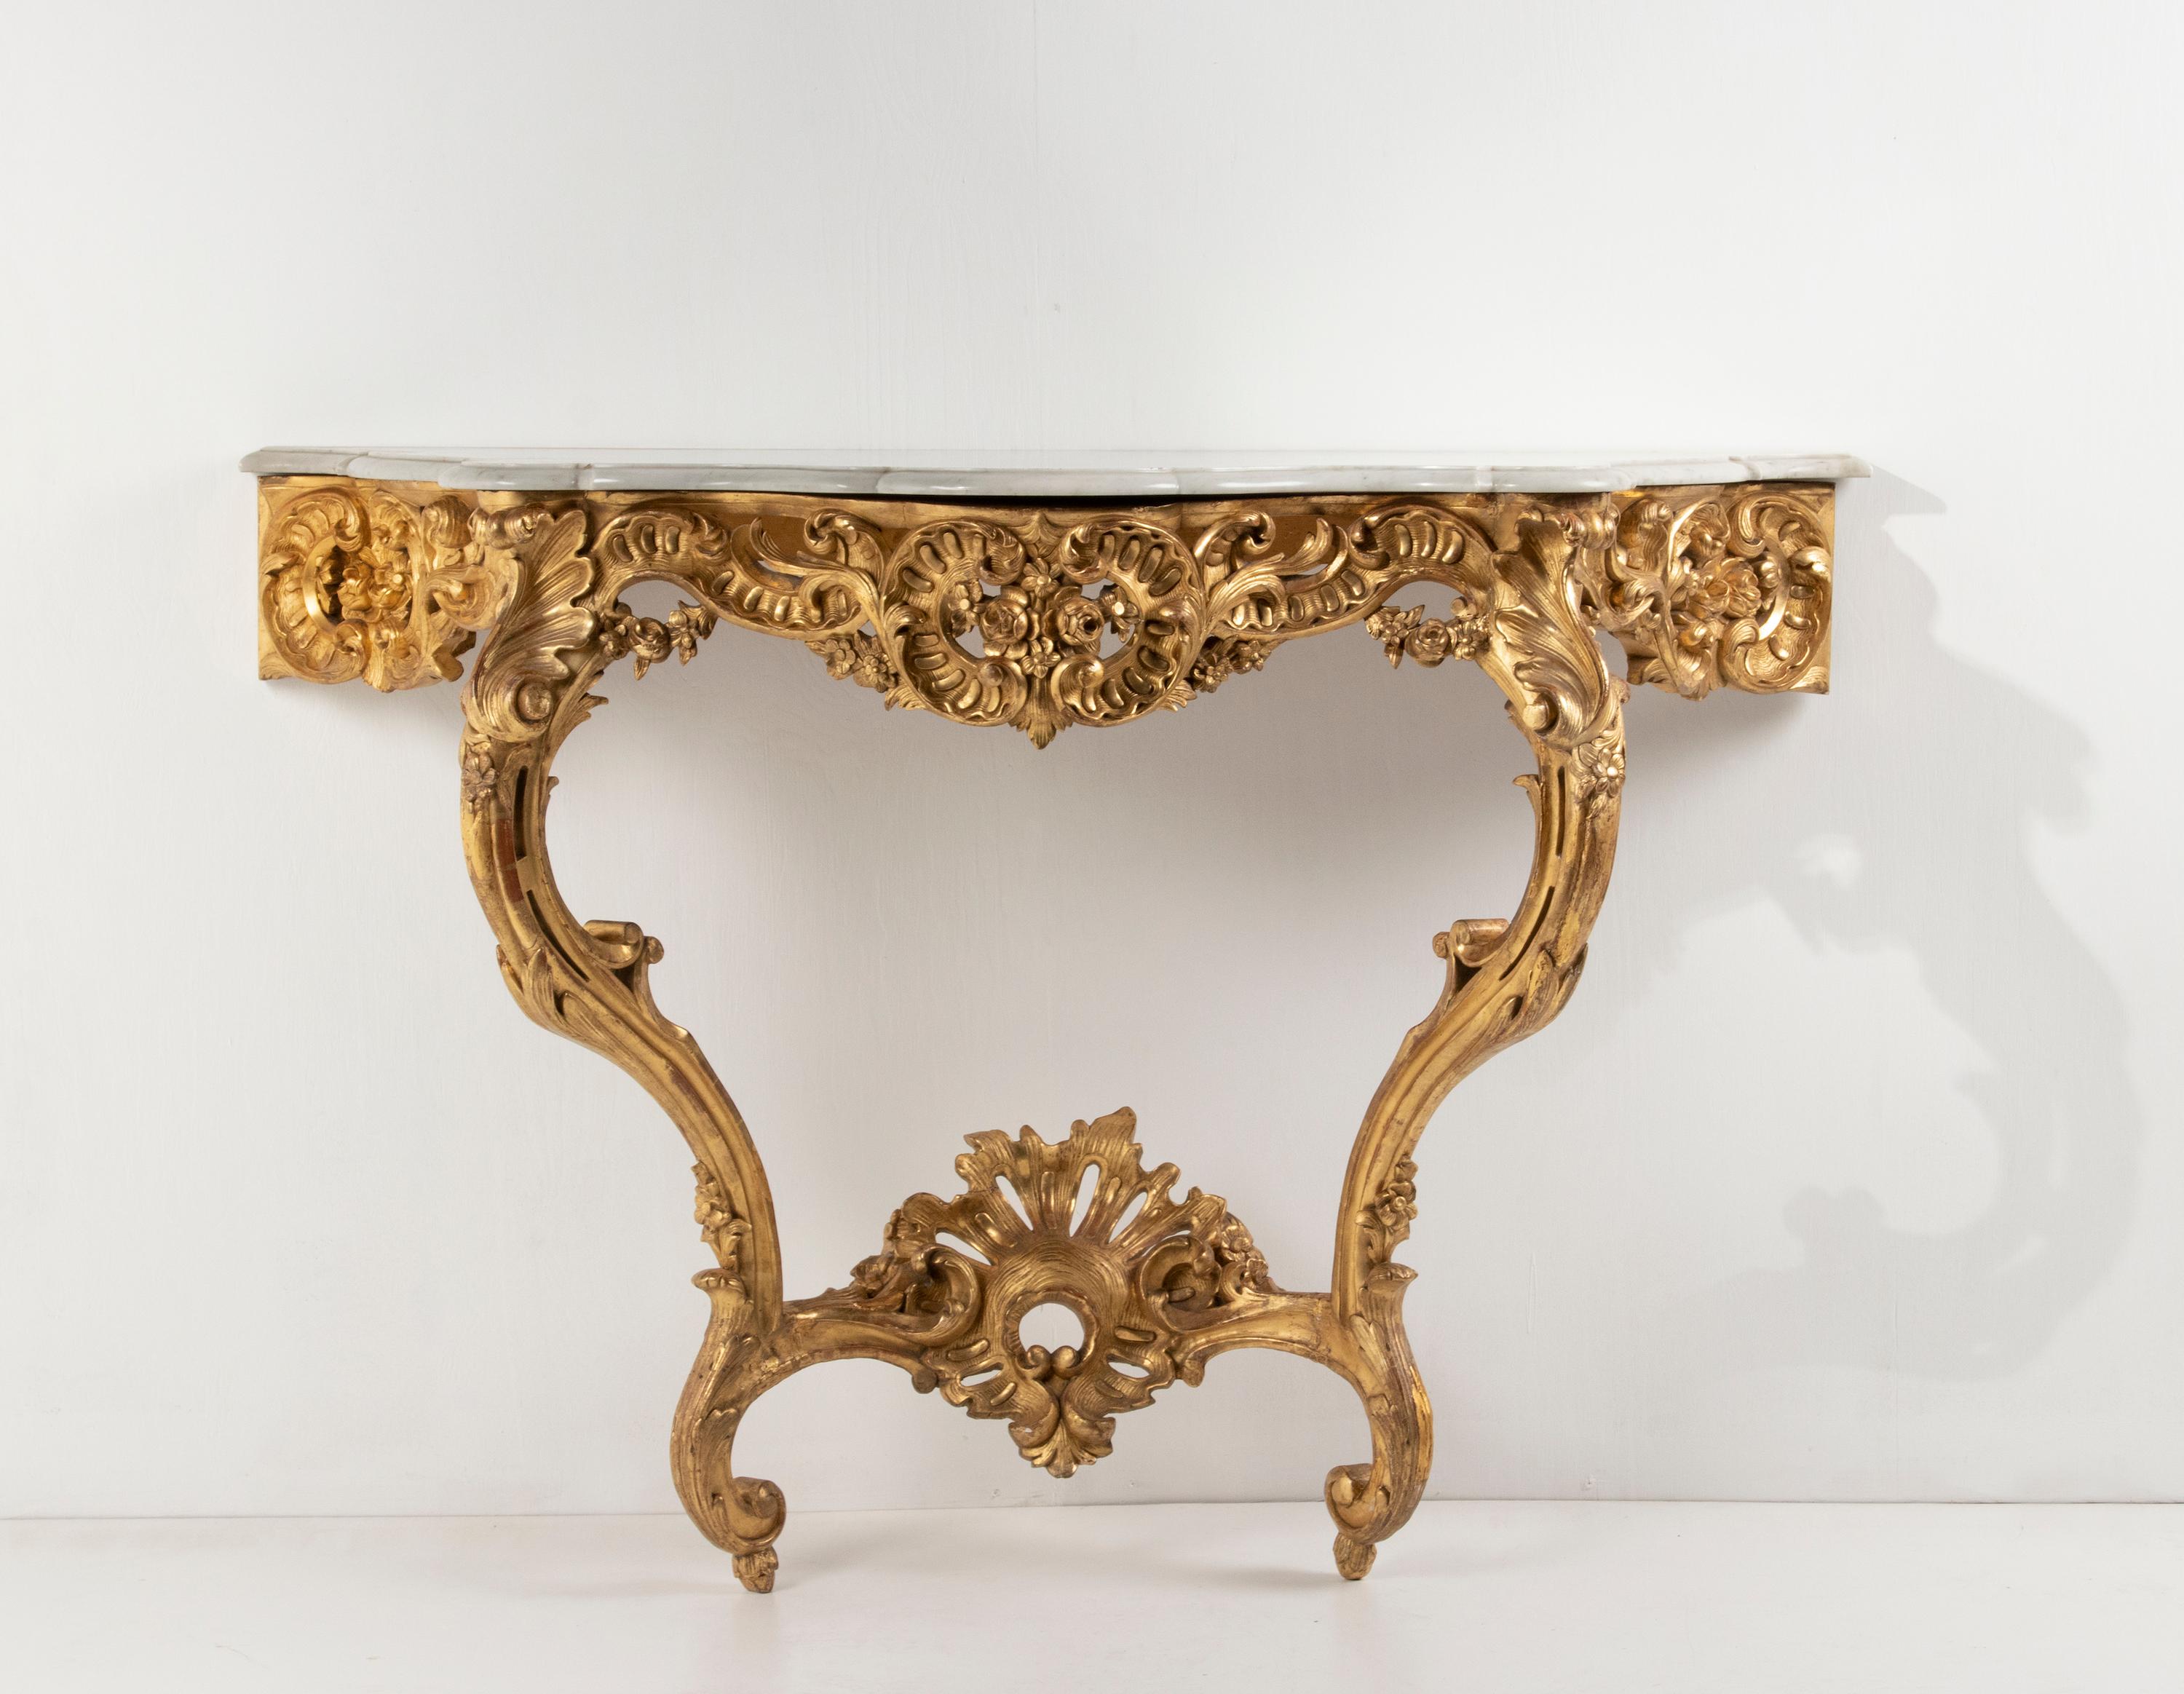 Beautiful antique French Napoleon III console table.
The table has beautiful carvings and is gilded with gold leaf.
The marble top has a profiled edge and curved shapes. This is Carrara marble, a very white type of marble.
The wooden base has an